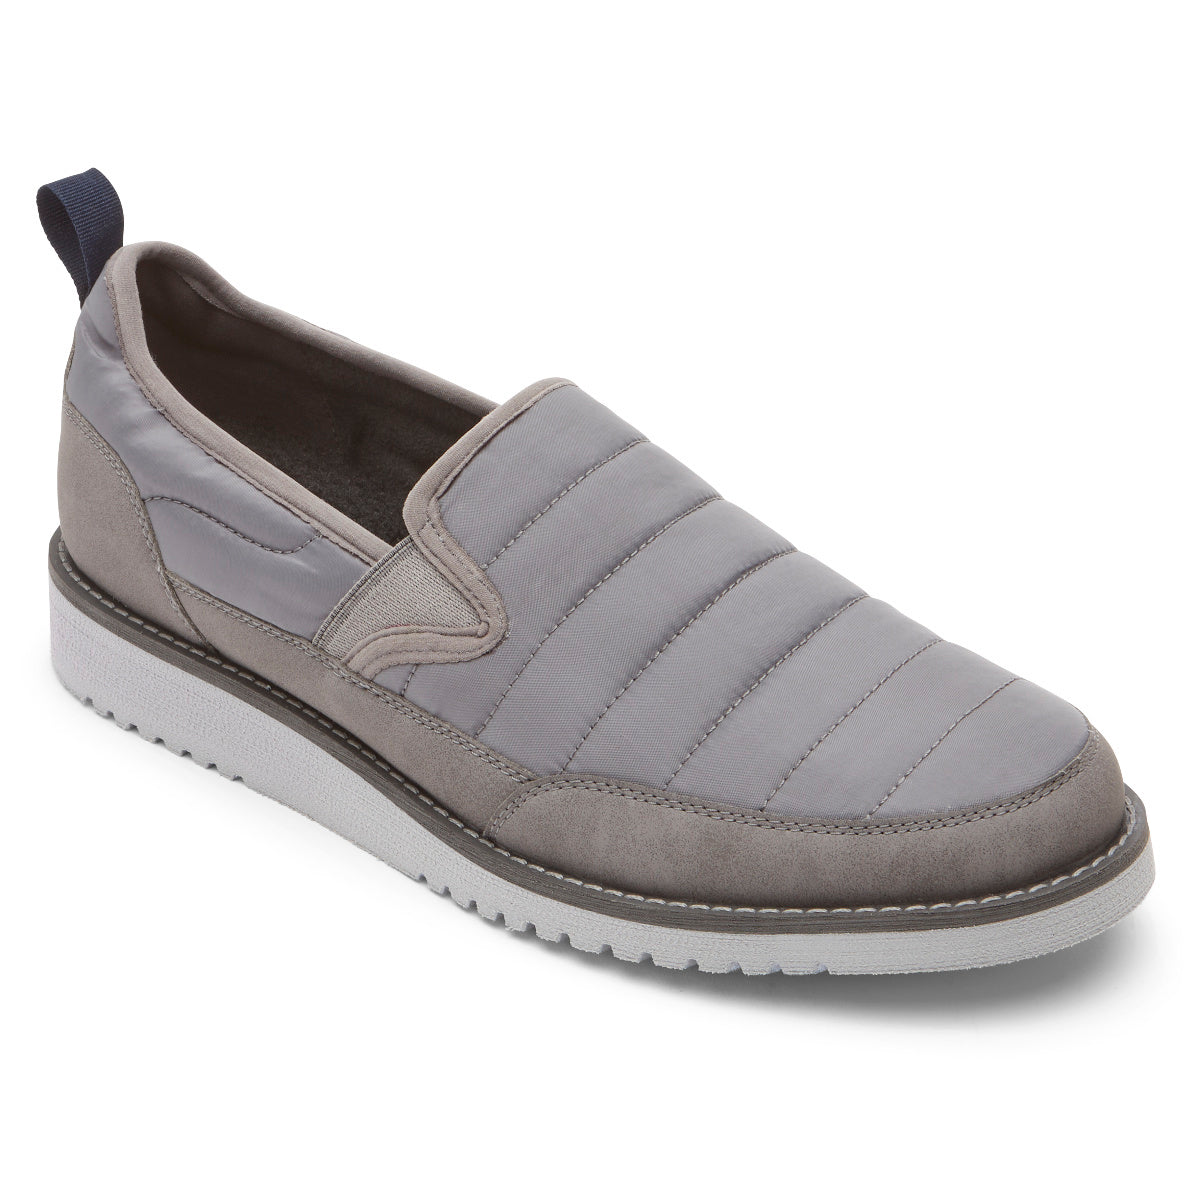 Mens Axelrod Quilted Slip-On